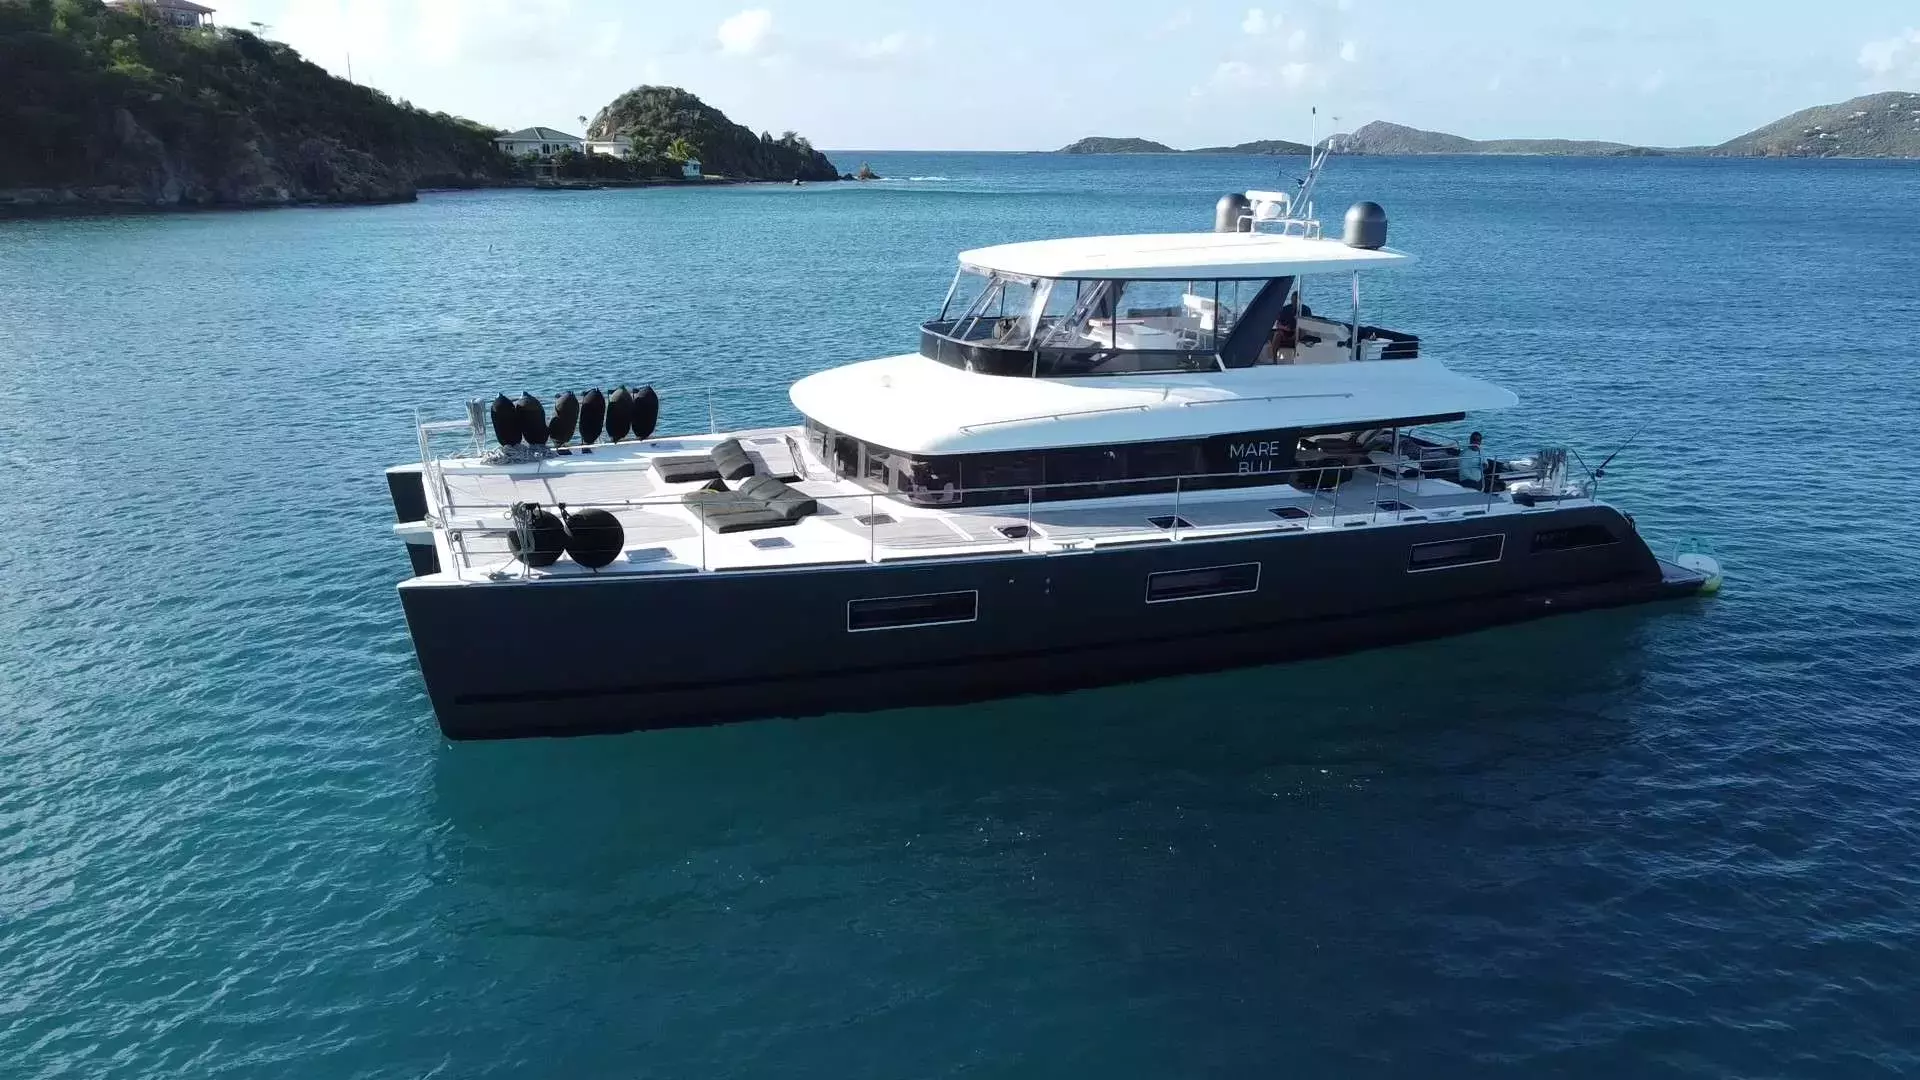 Mare Blu by Lagoon - Top rates for a Rental of a private Power Catamaran in British Virgin Islands